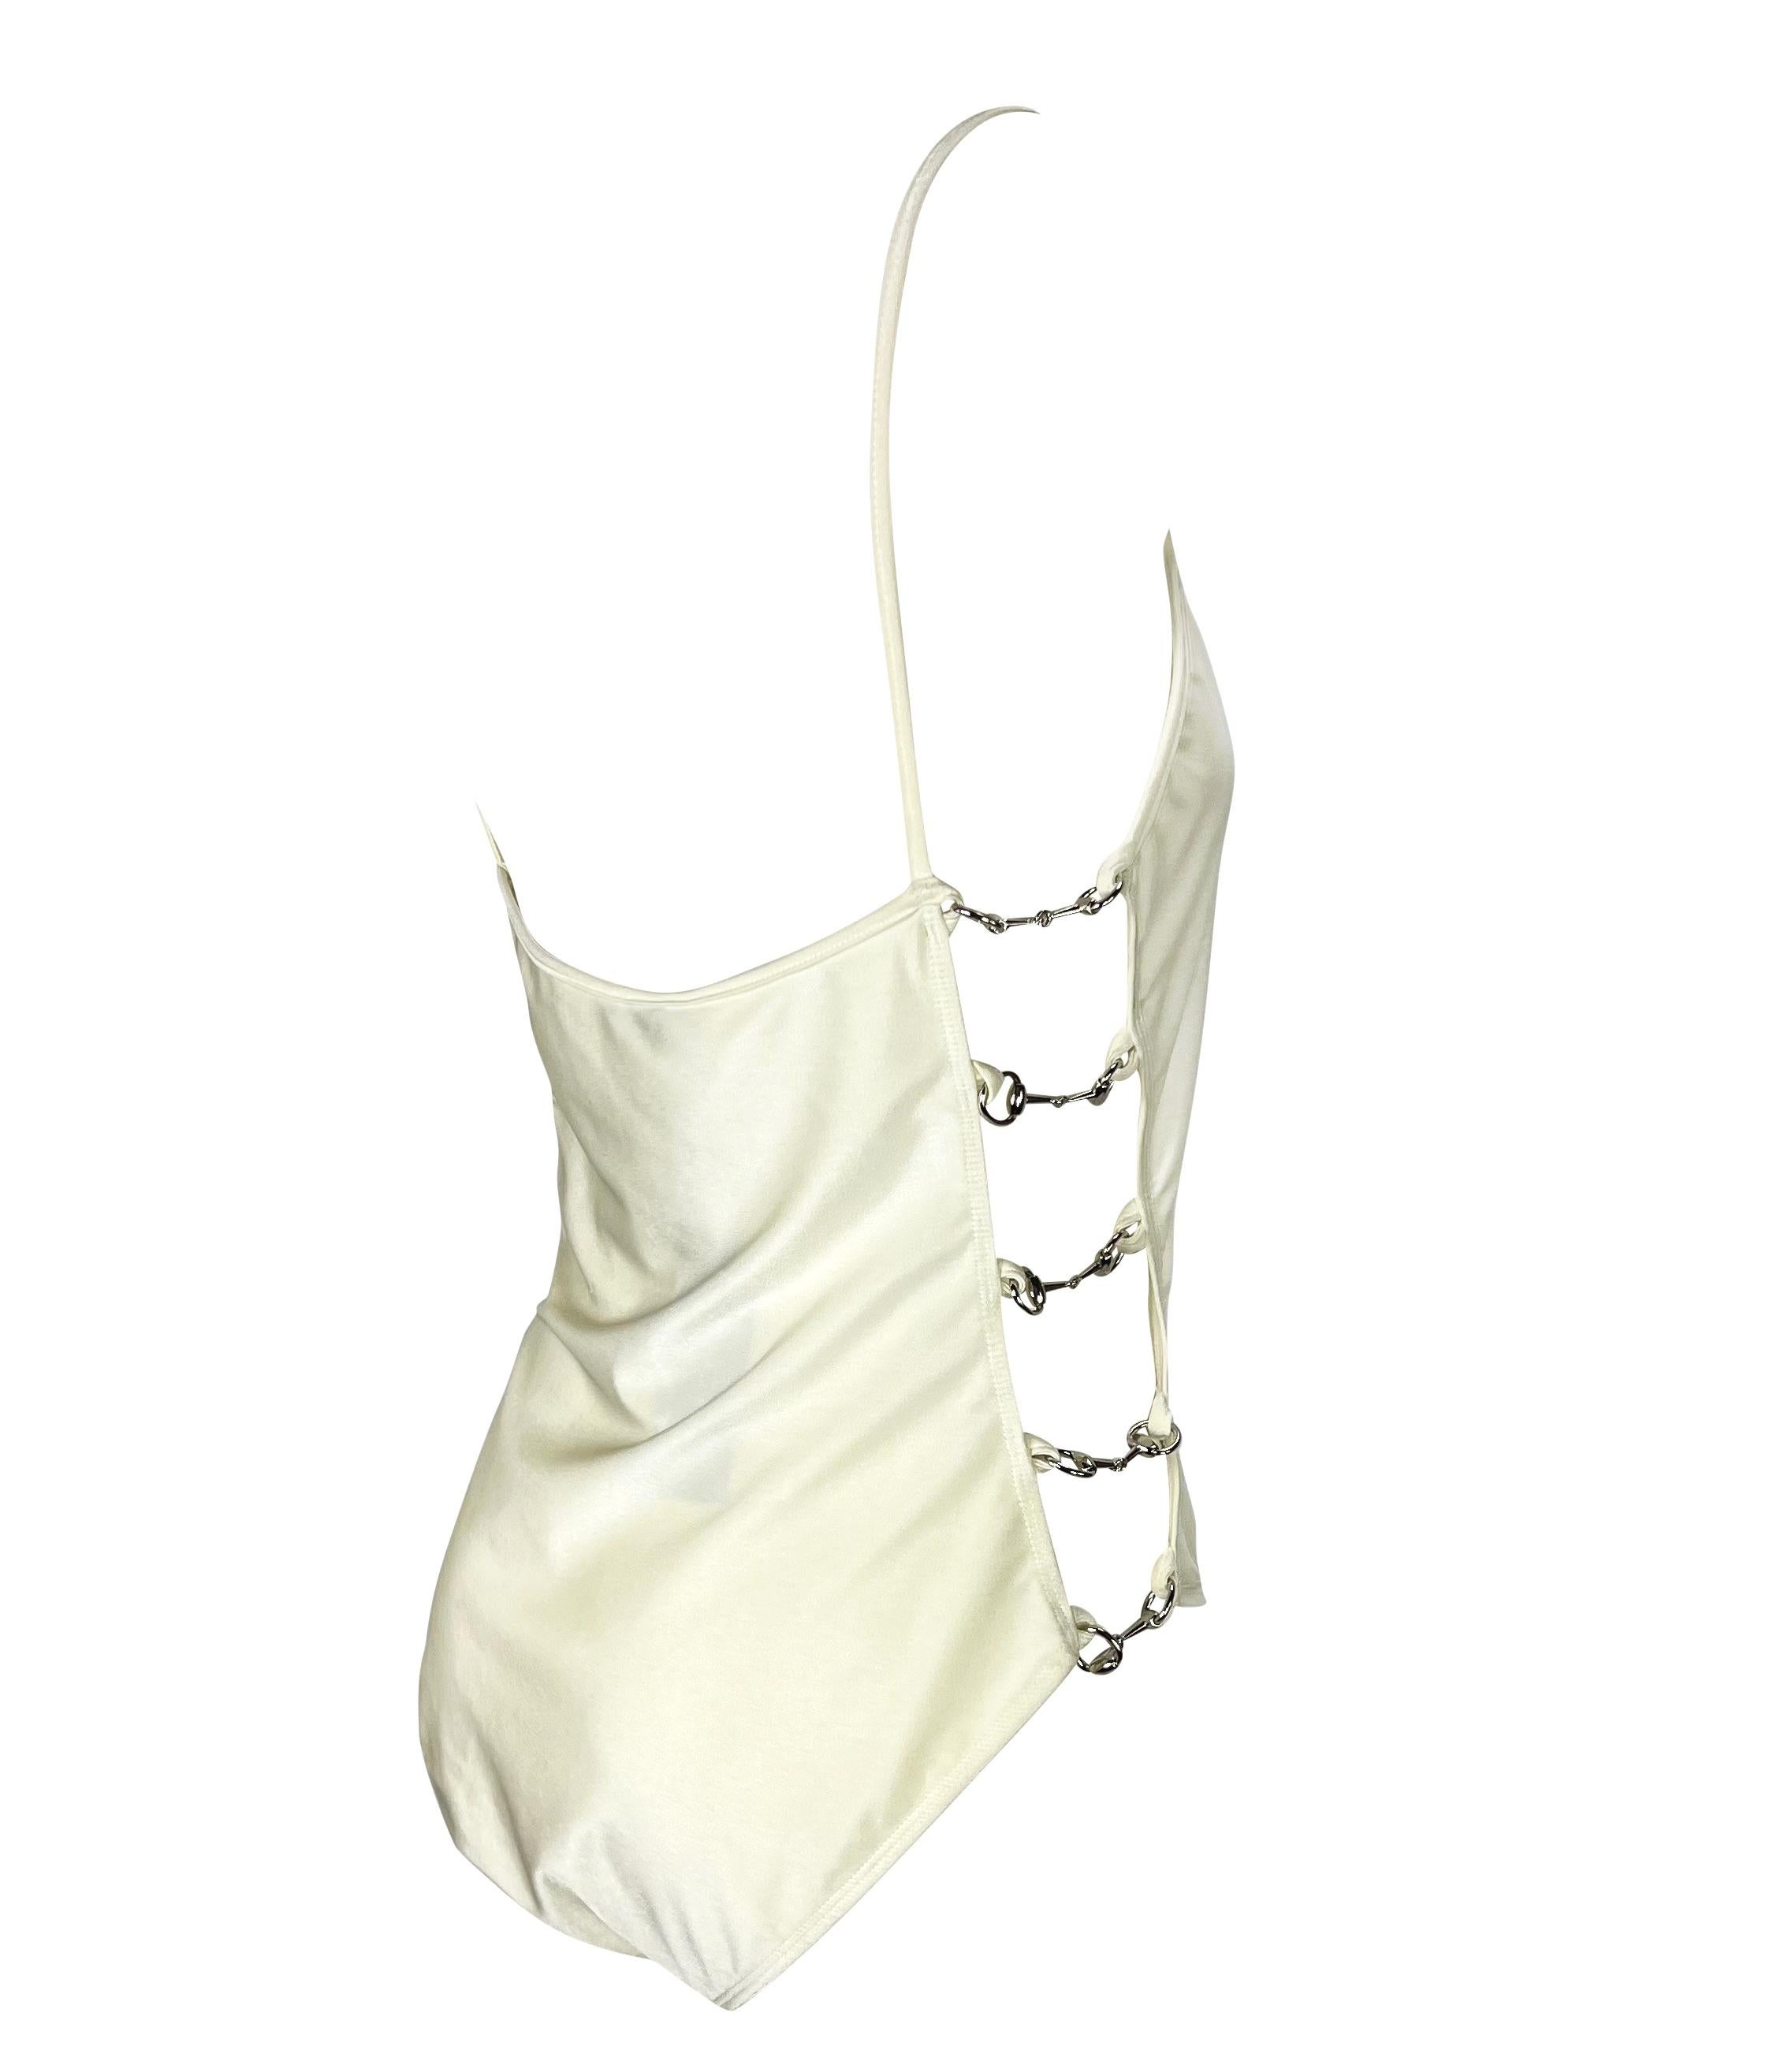 Women's NWT S/S 1995 Gucci by Tom Ford Horsebit Side Slit White One-Piece Swimsuit